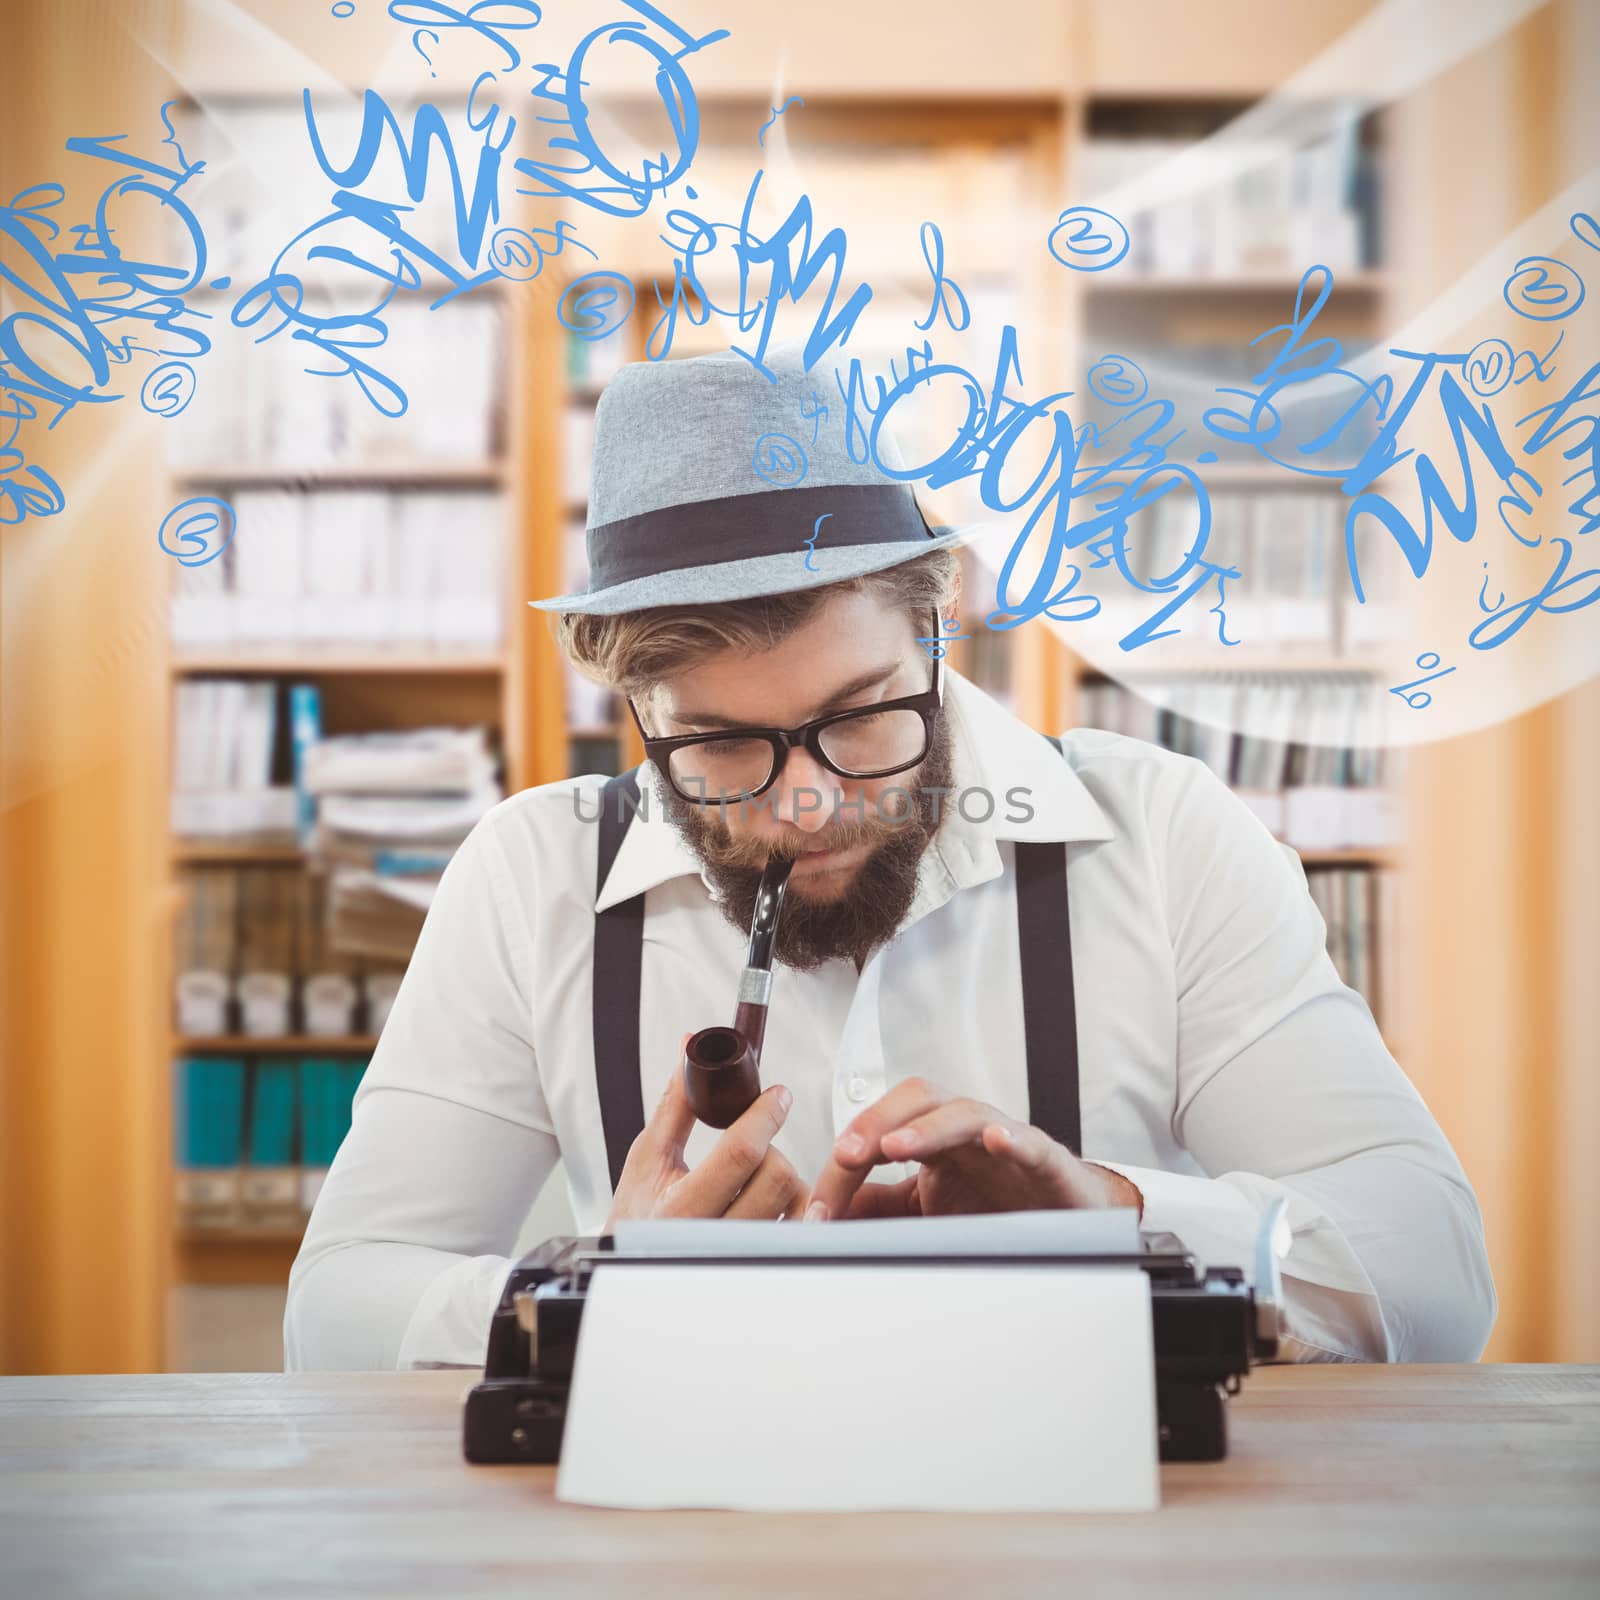 Hipster smoking pipe while working at desk against library